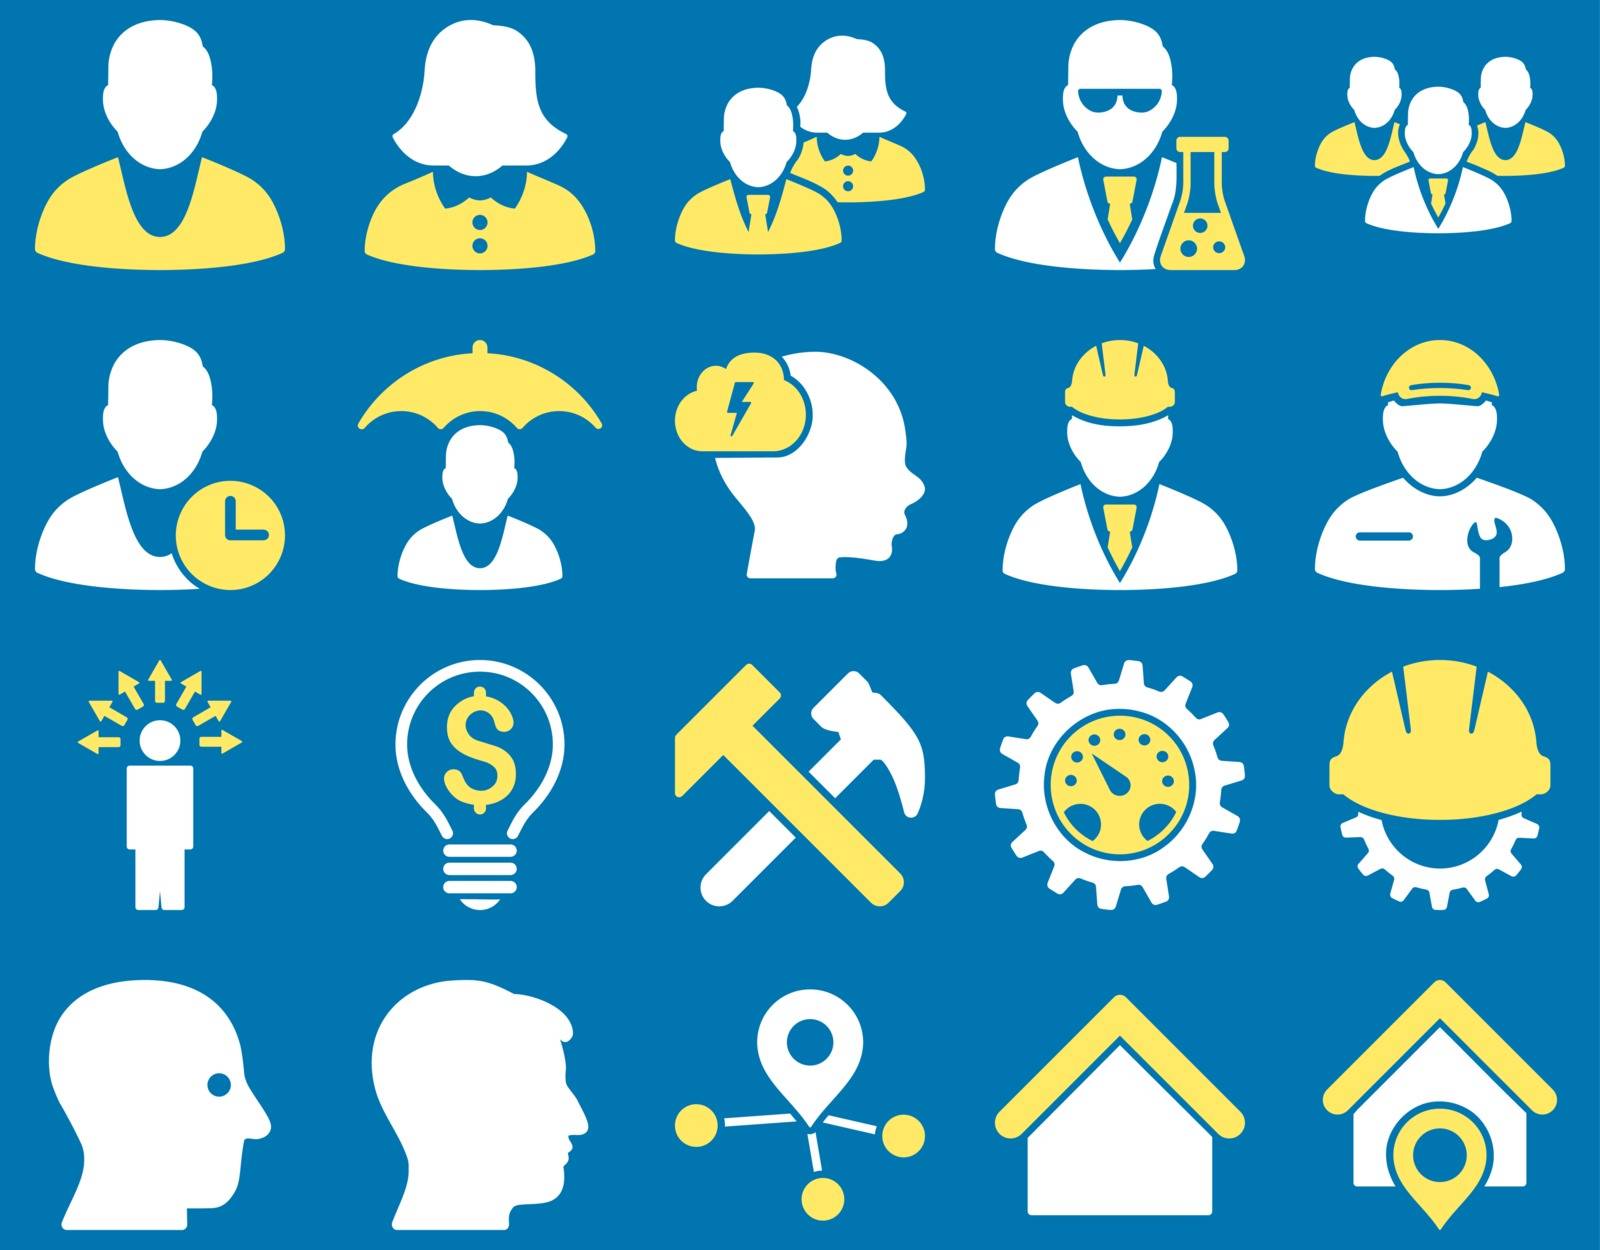 Client and business icon set. These flat bicolor icons use yellow and white colors. Images are isolated on a blue background. Angles are rounded.